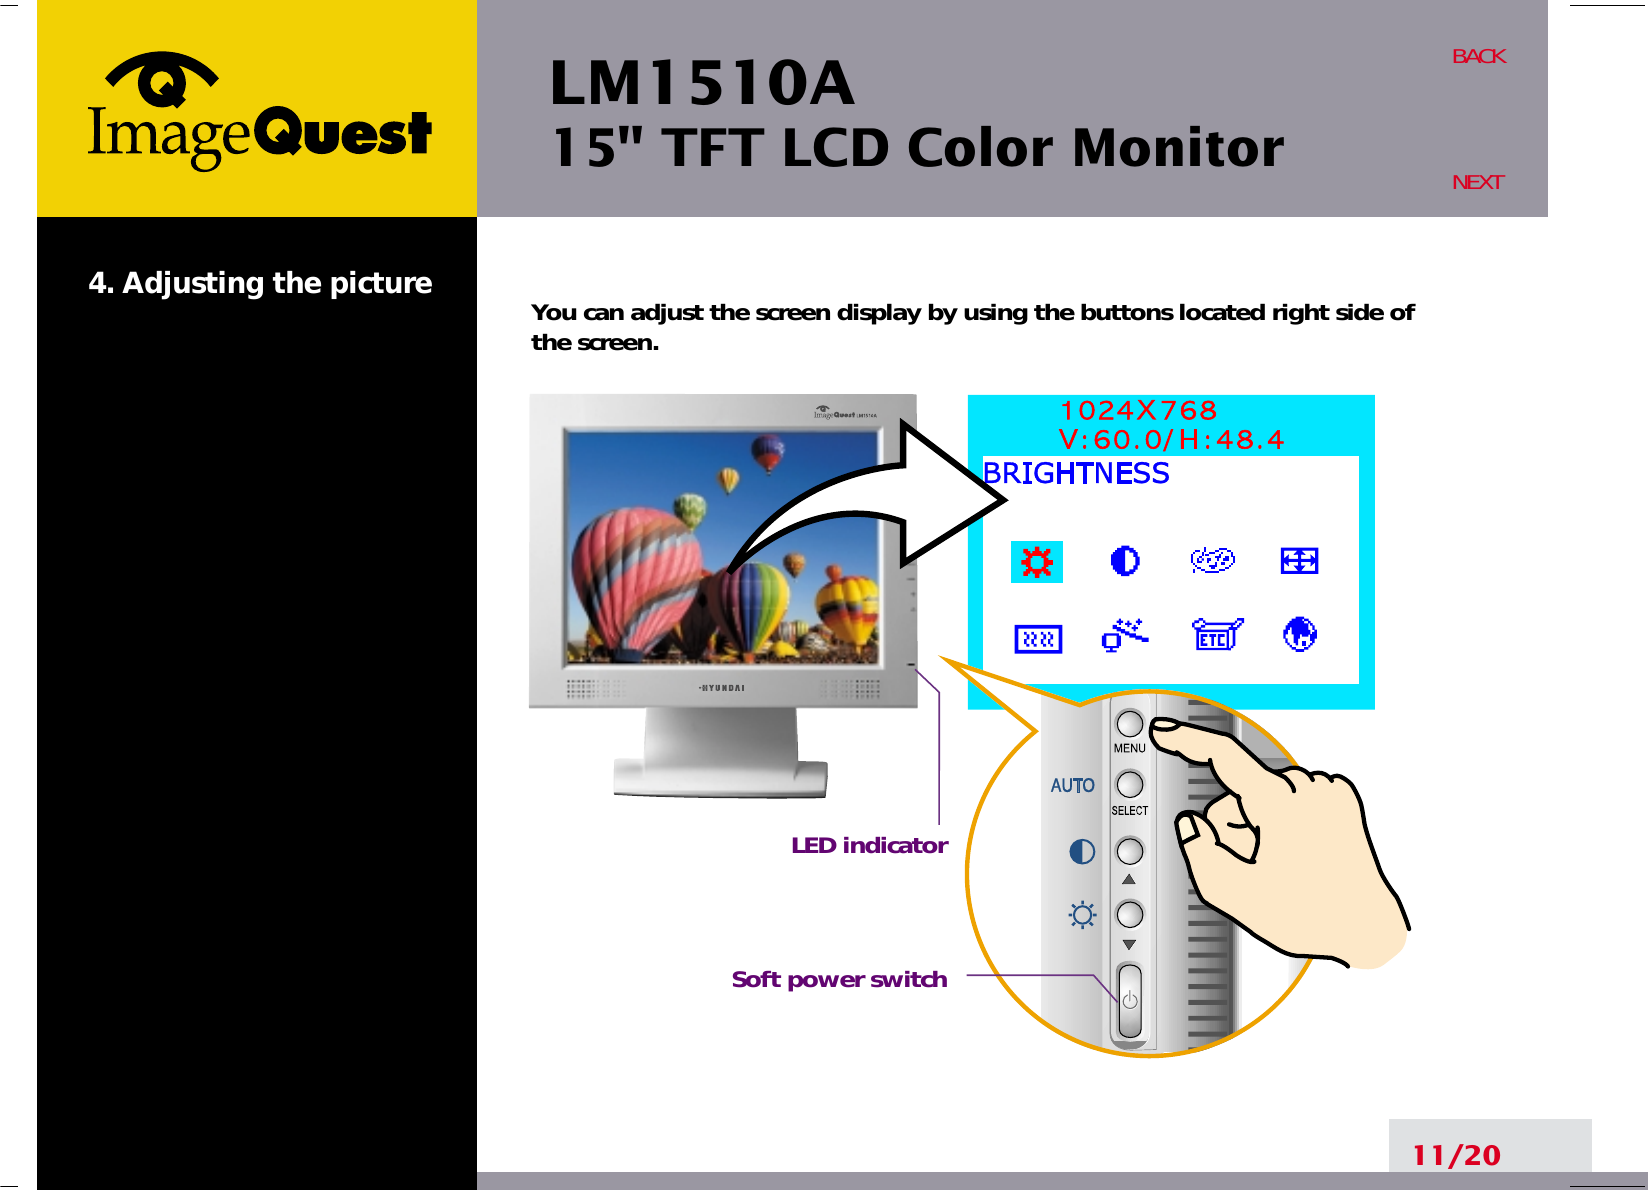 LM1510A15&quot; TFT LCD Color Monitor4. Adjusting the picture11/20BACKNEXTYou can adjust the screen display by using the buttons located right side ofthe screen.LED indicatorSoft power switch